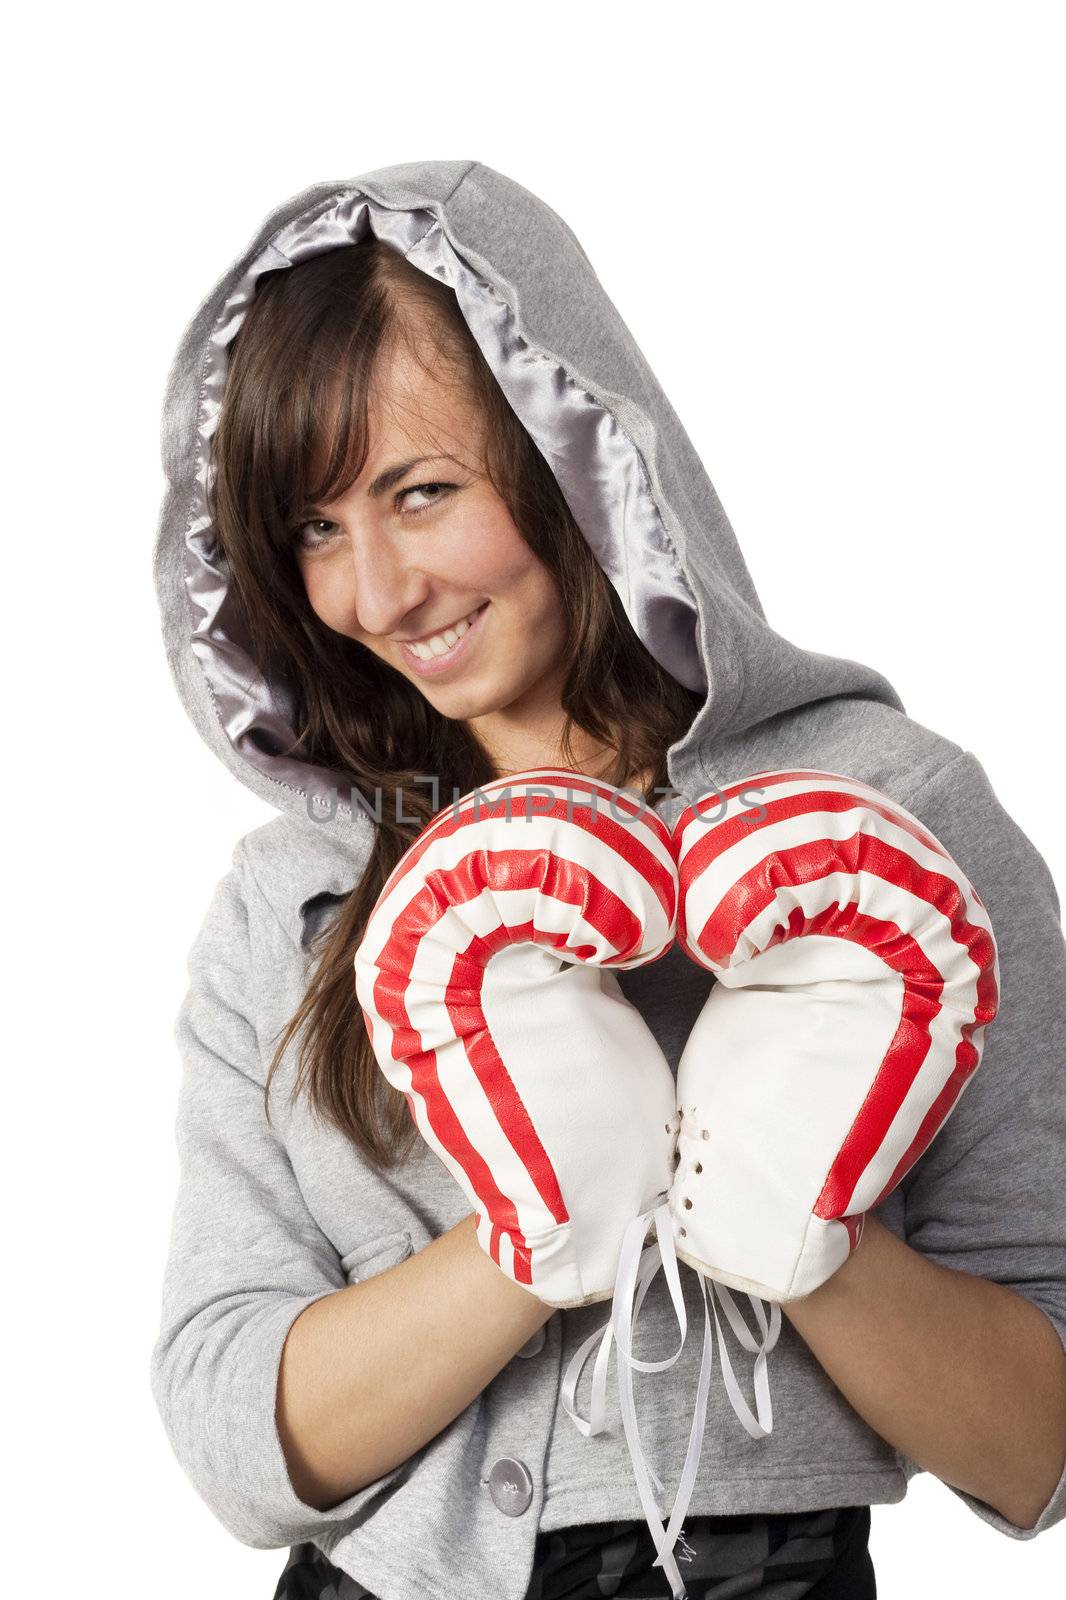 Girl shows a heart with boxing gloves